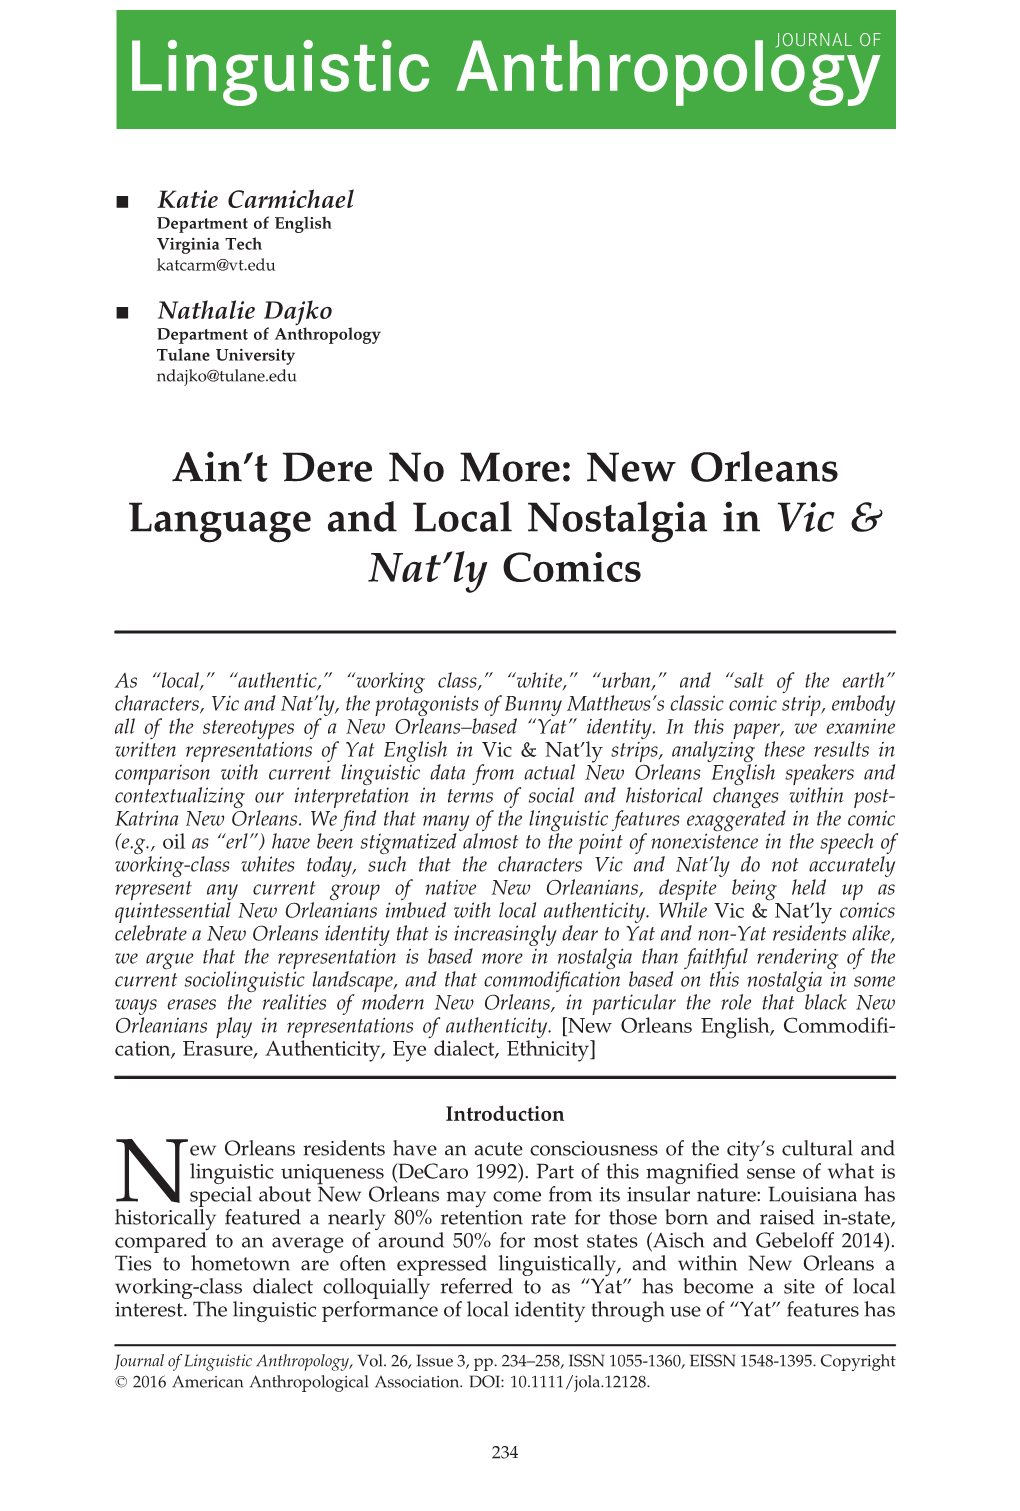 T Dere No More: New Orleans Language and Local Nostalgia in Vic &#X0026